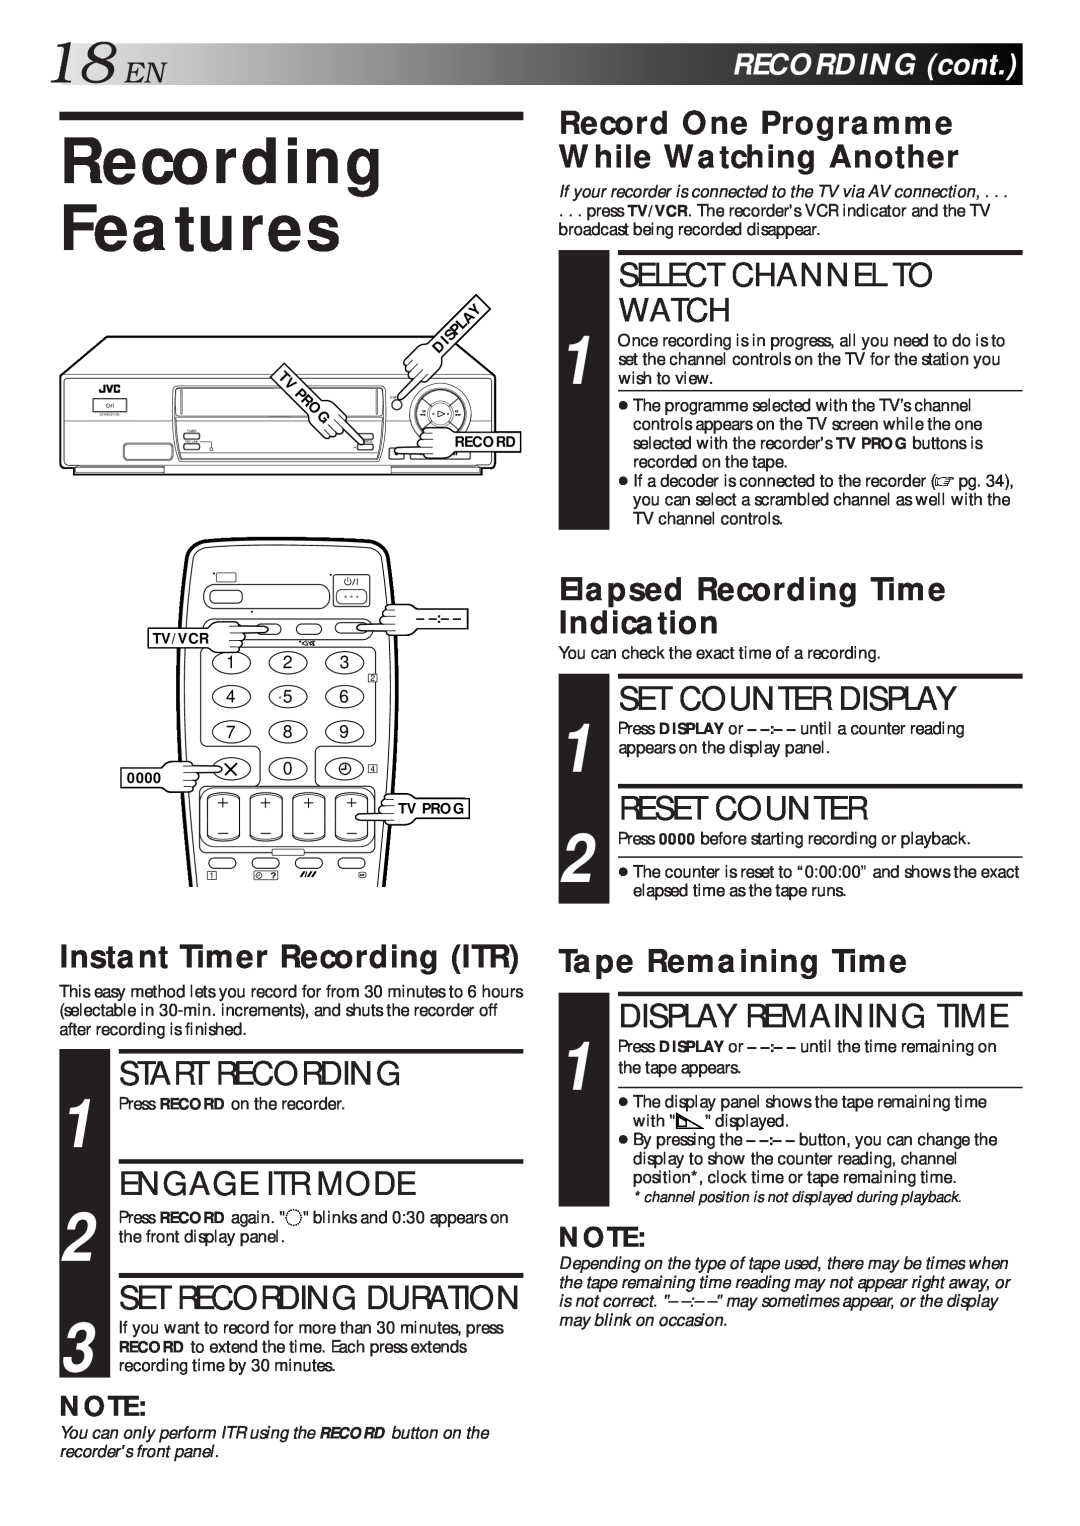 JVC HR-J712EU Recording Features, 18EN, Select Channel To Watch, Set Counter Display, Reset Counter, Engage Itr Mode, Prog 